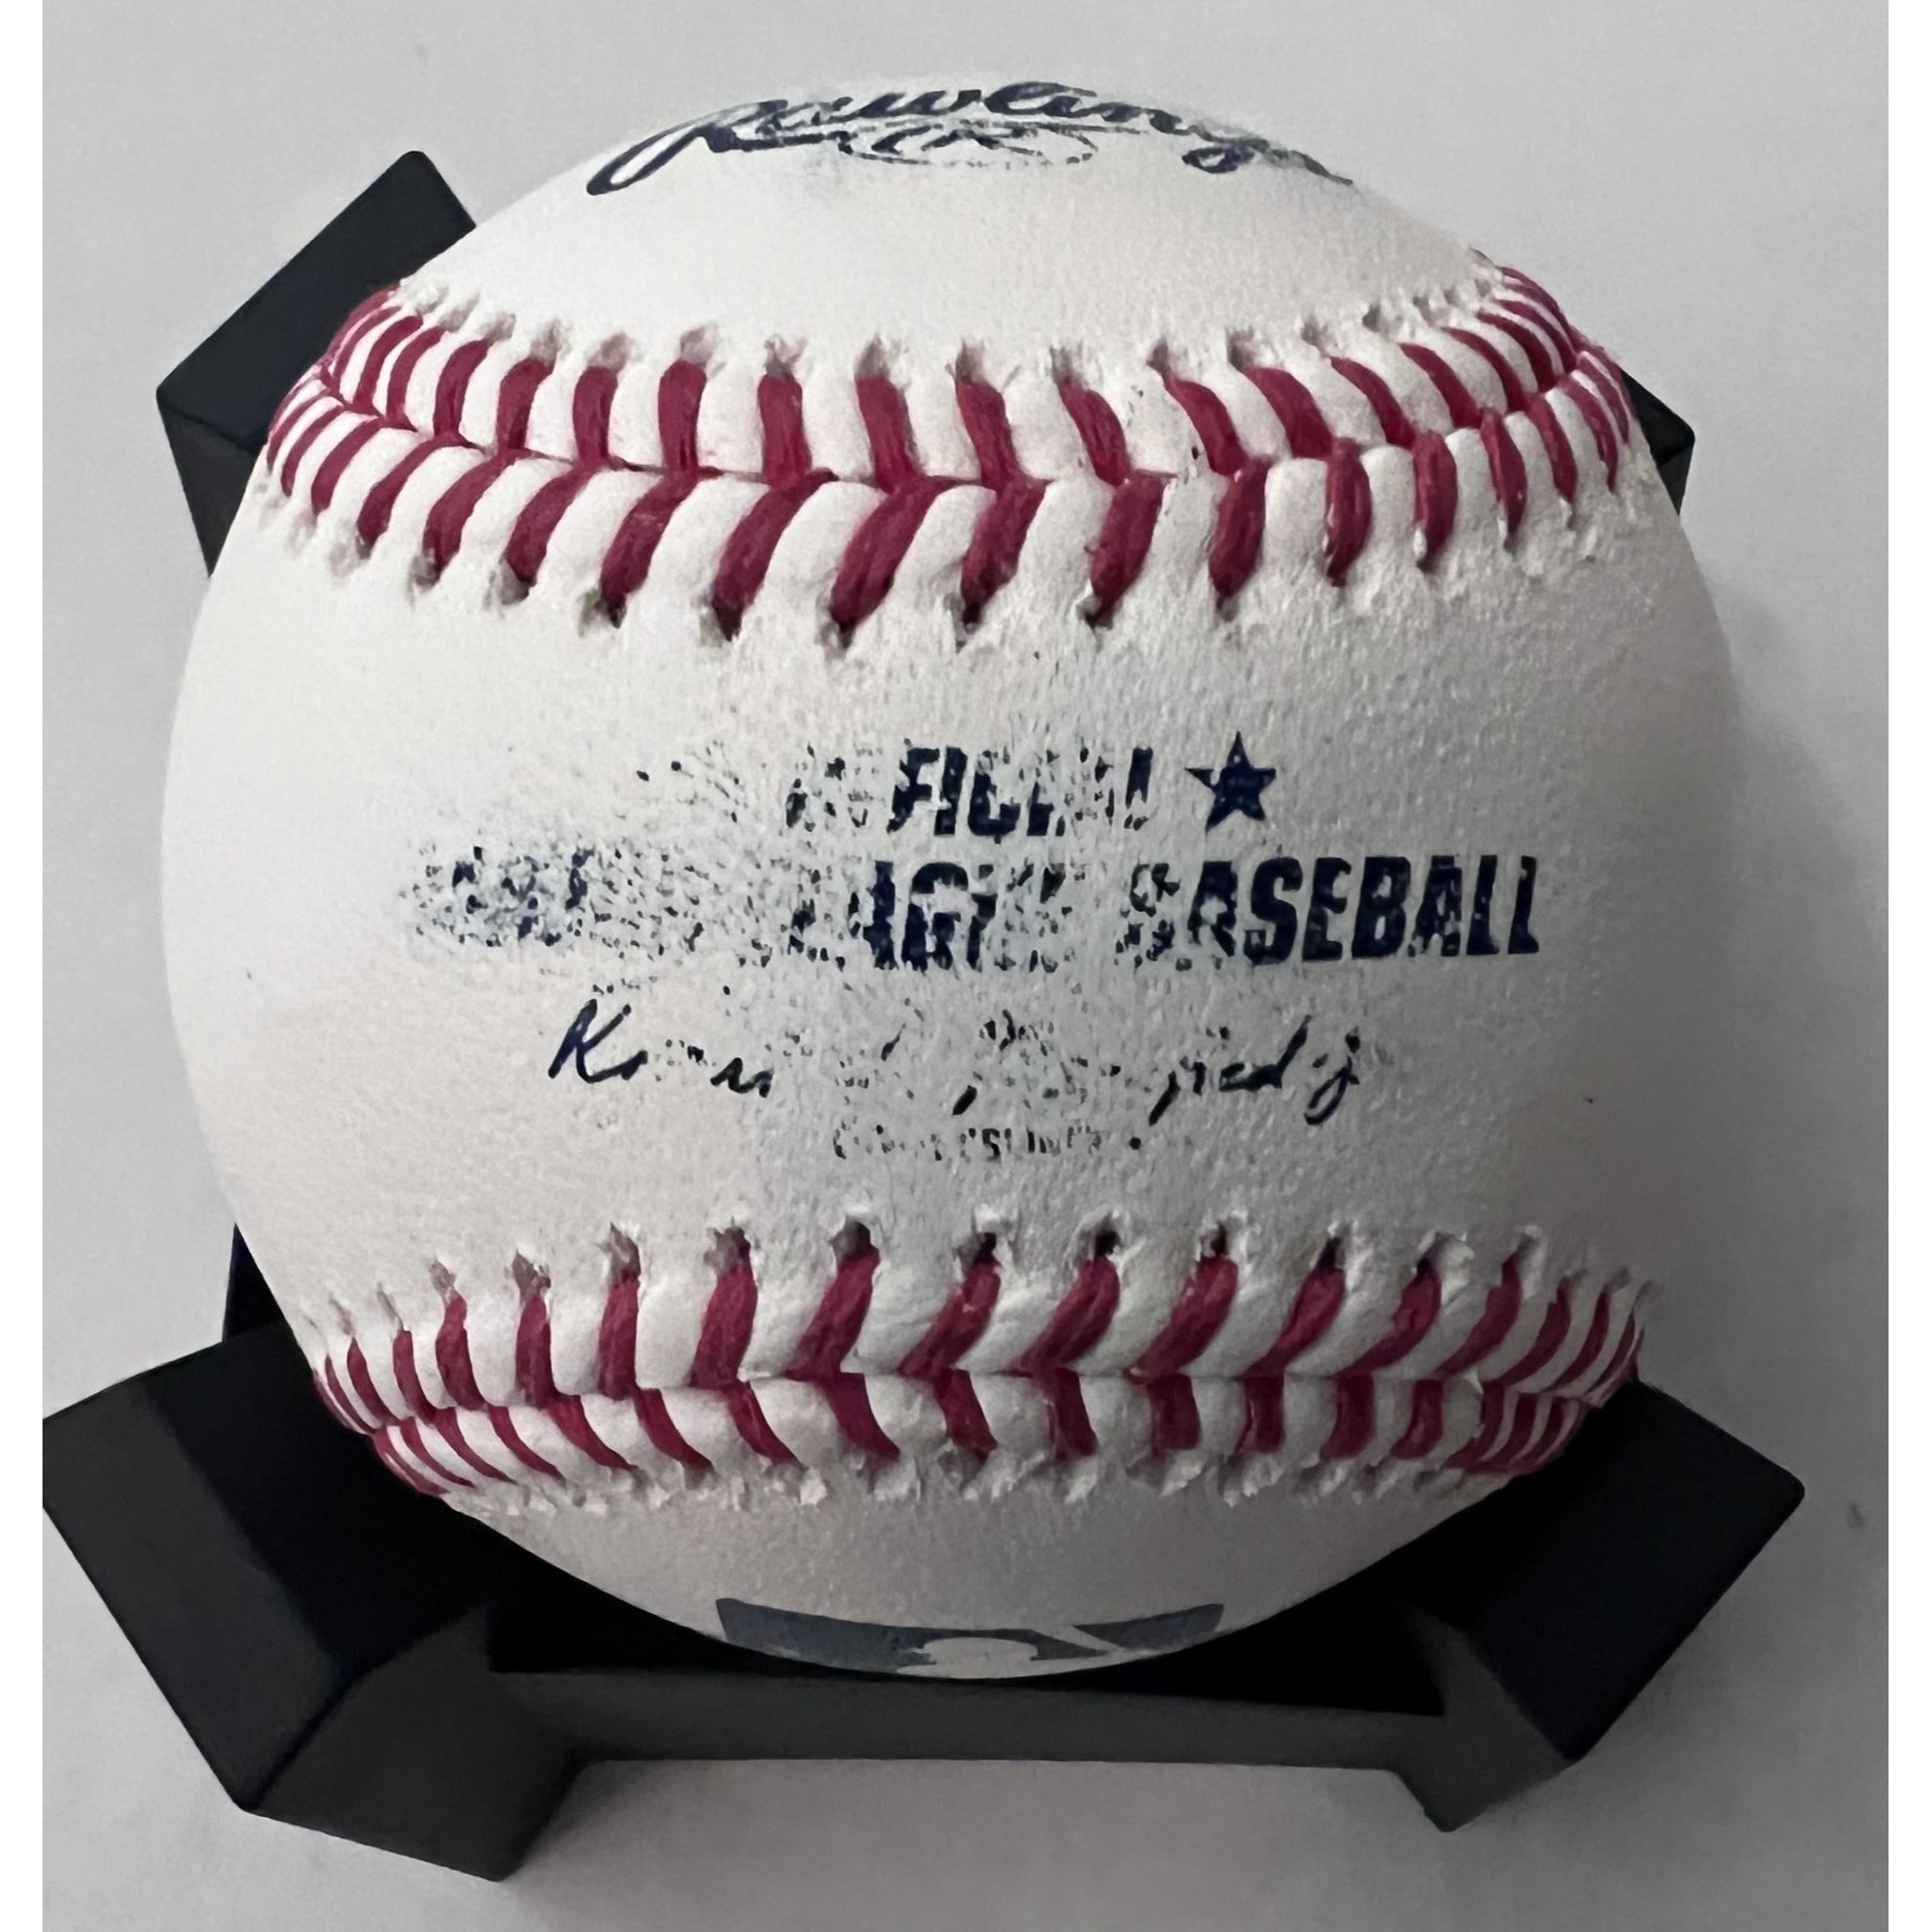 Los Angeles Dodgers Walker Bueller Clayton Kershaw official Rawlings MLB baseball signed with proof